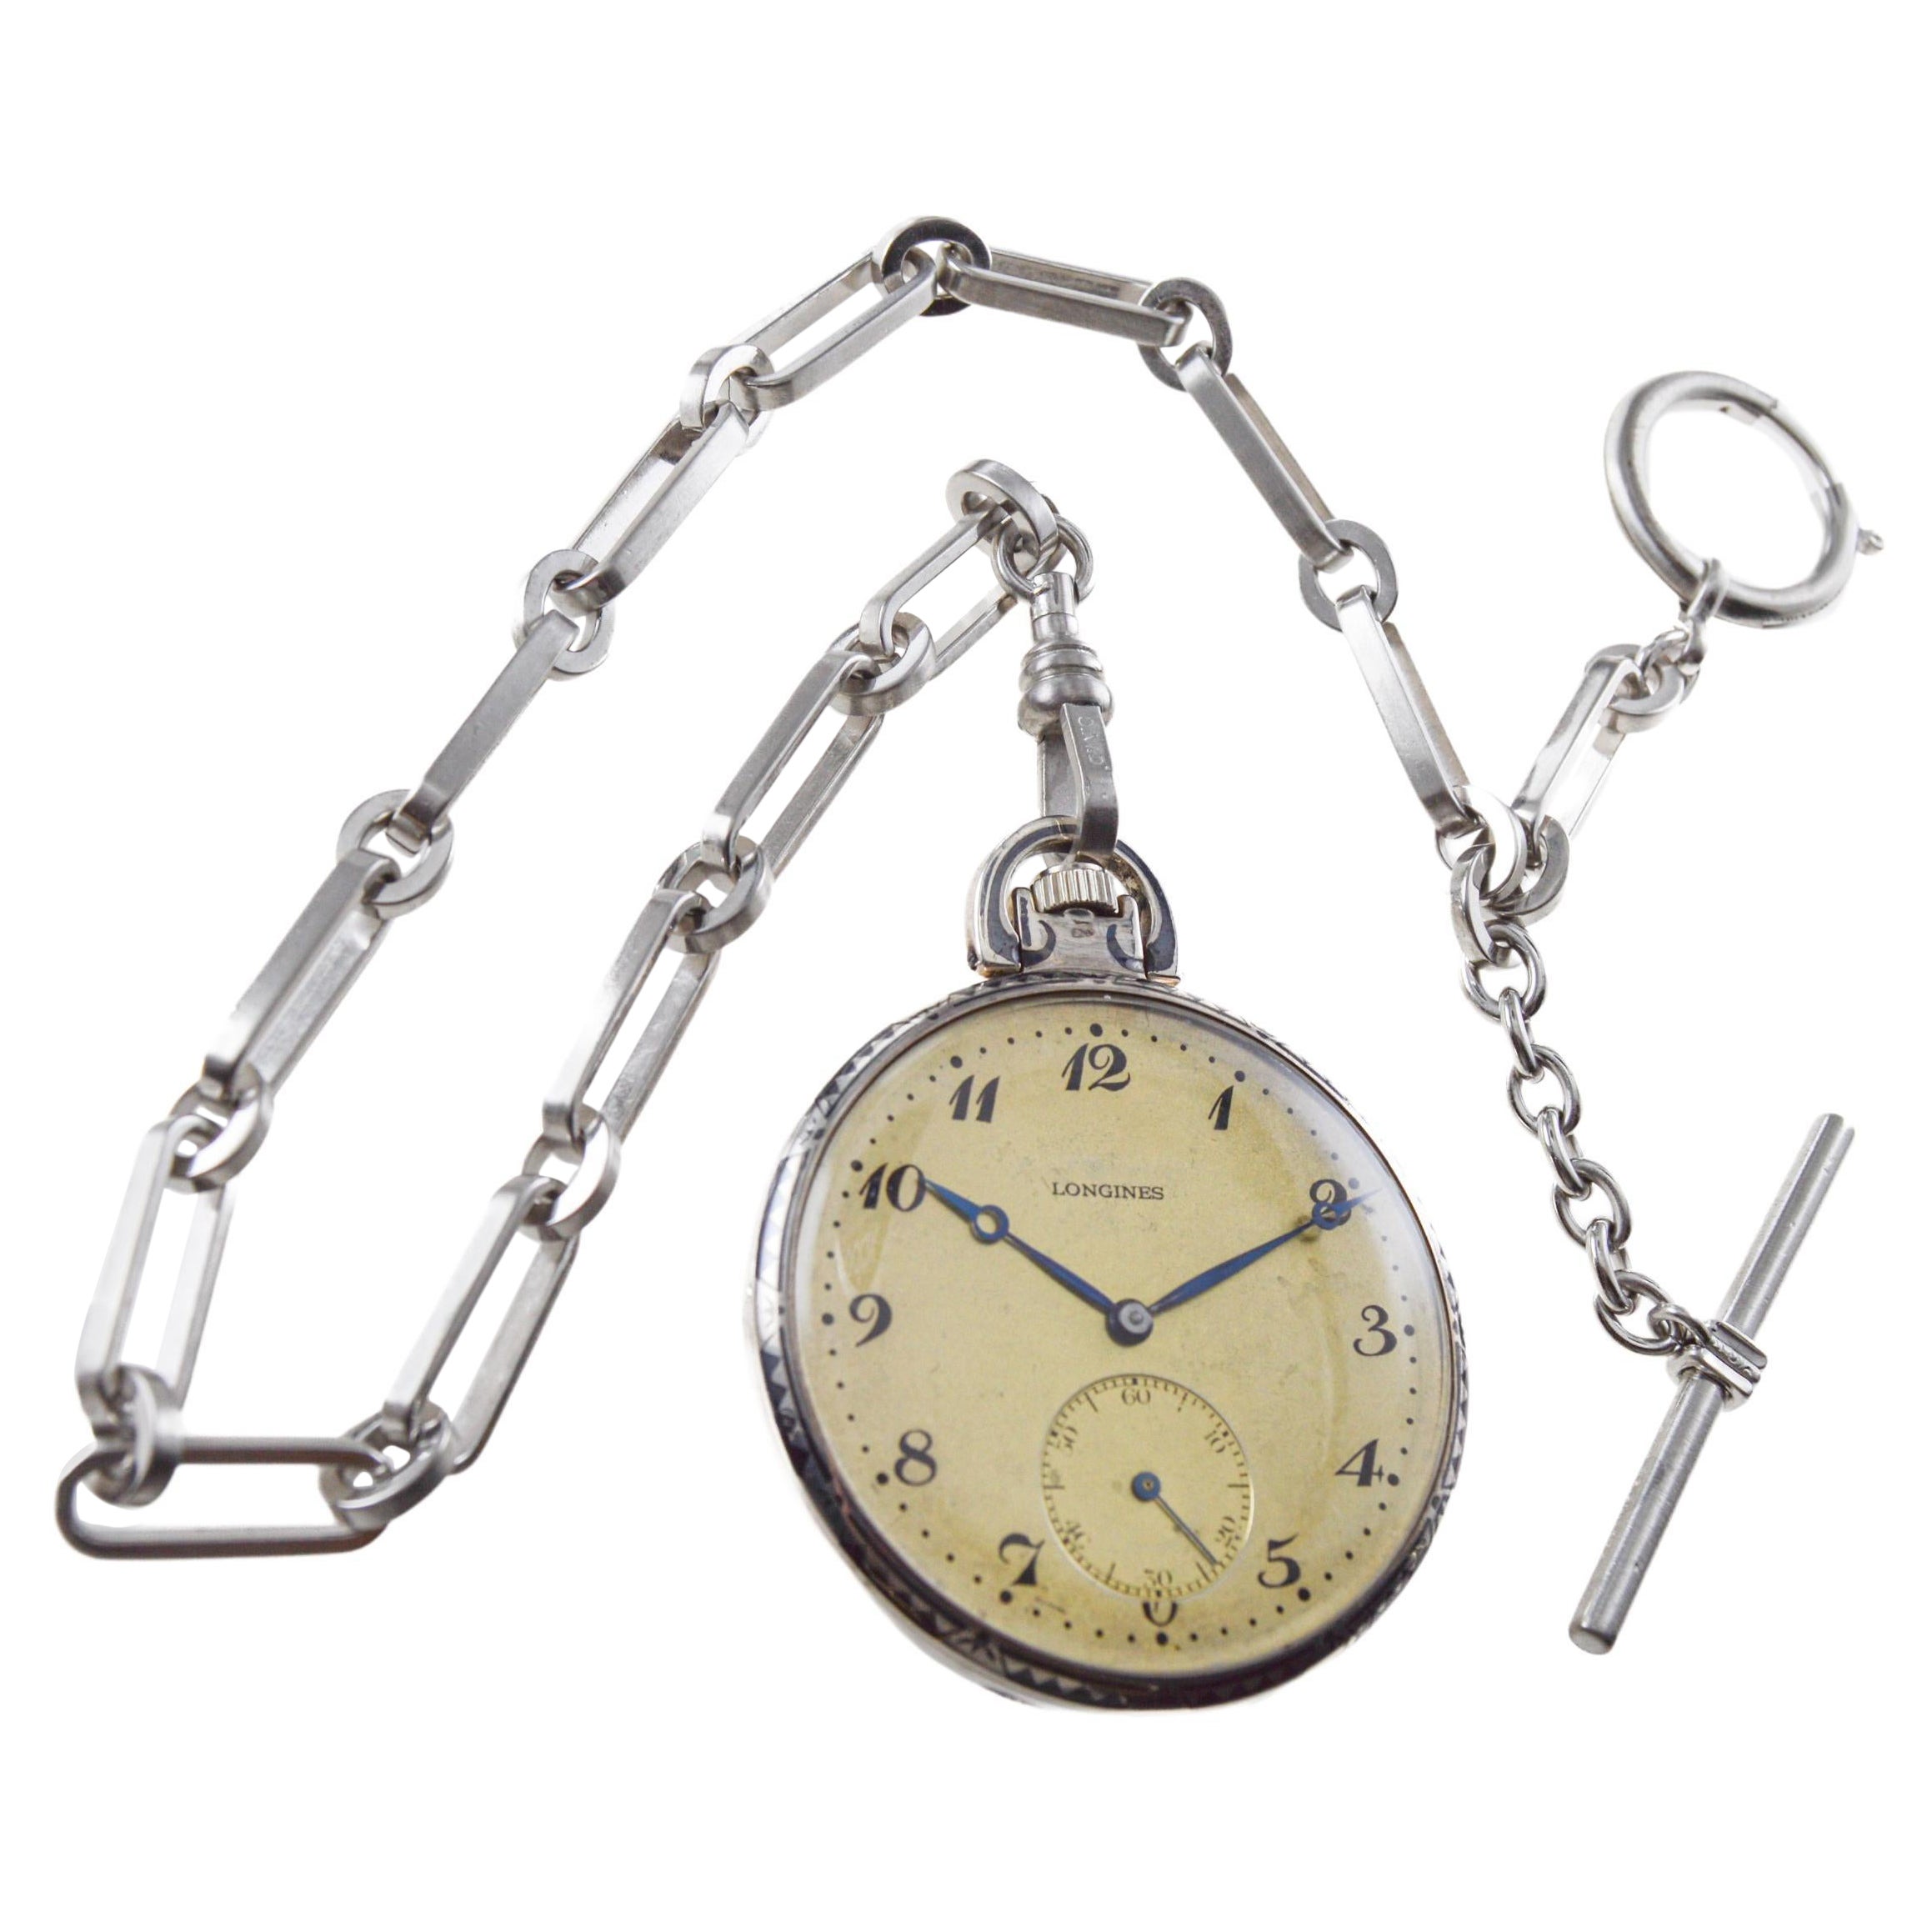 Longines Silver & Niello Watch from 1915 Dial by Stern Freres Matching Chain For Sale